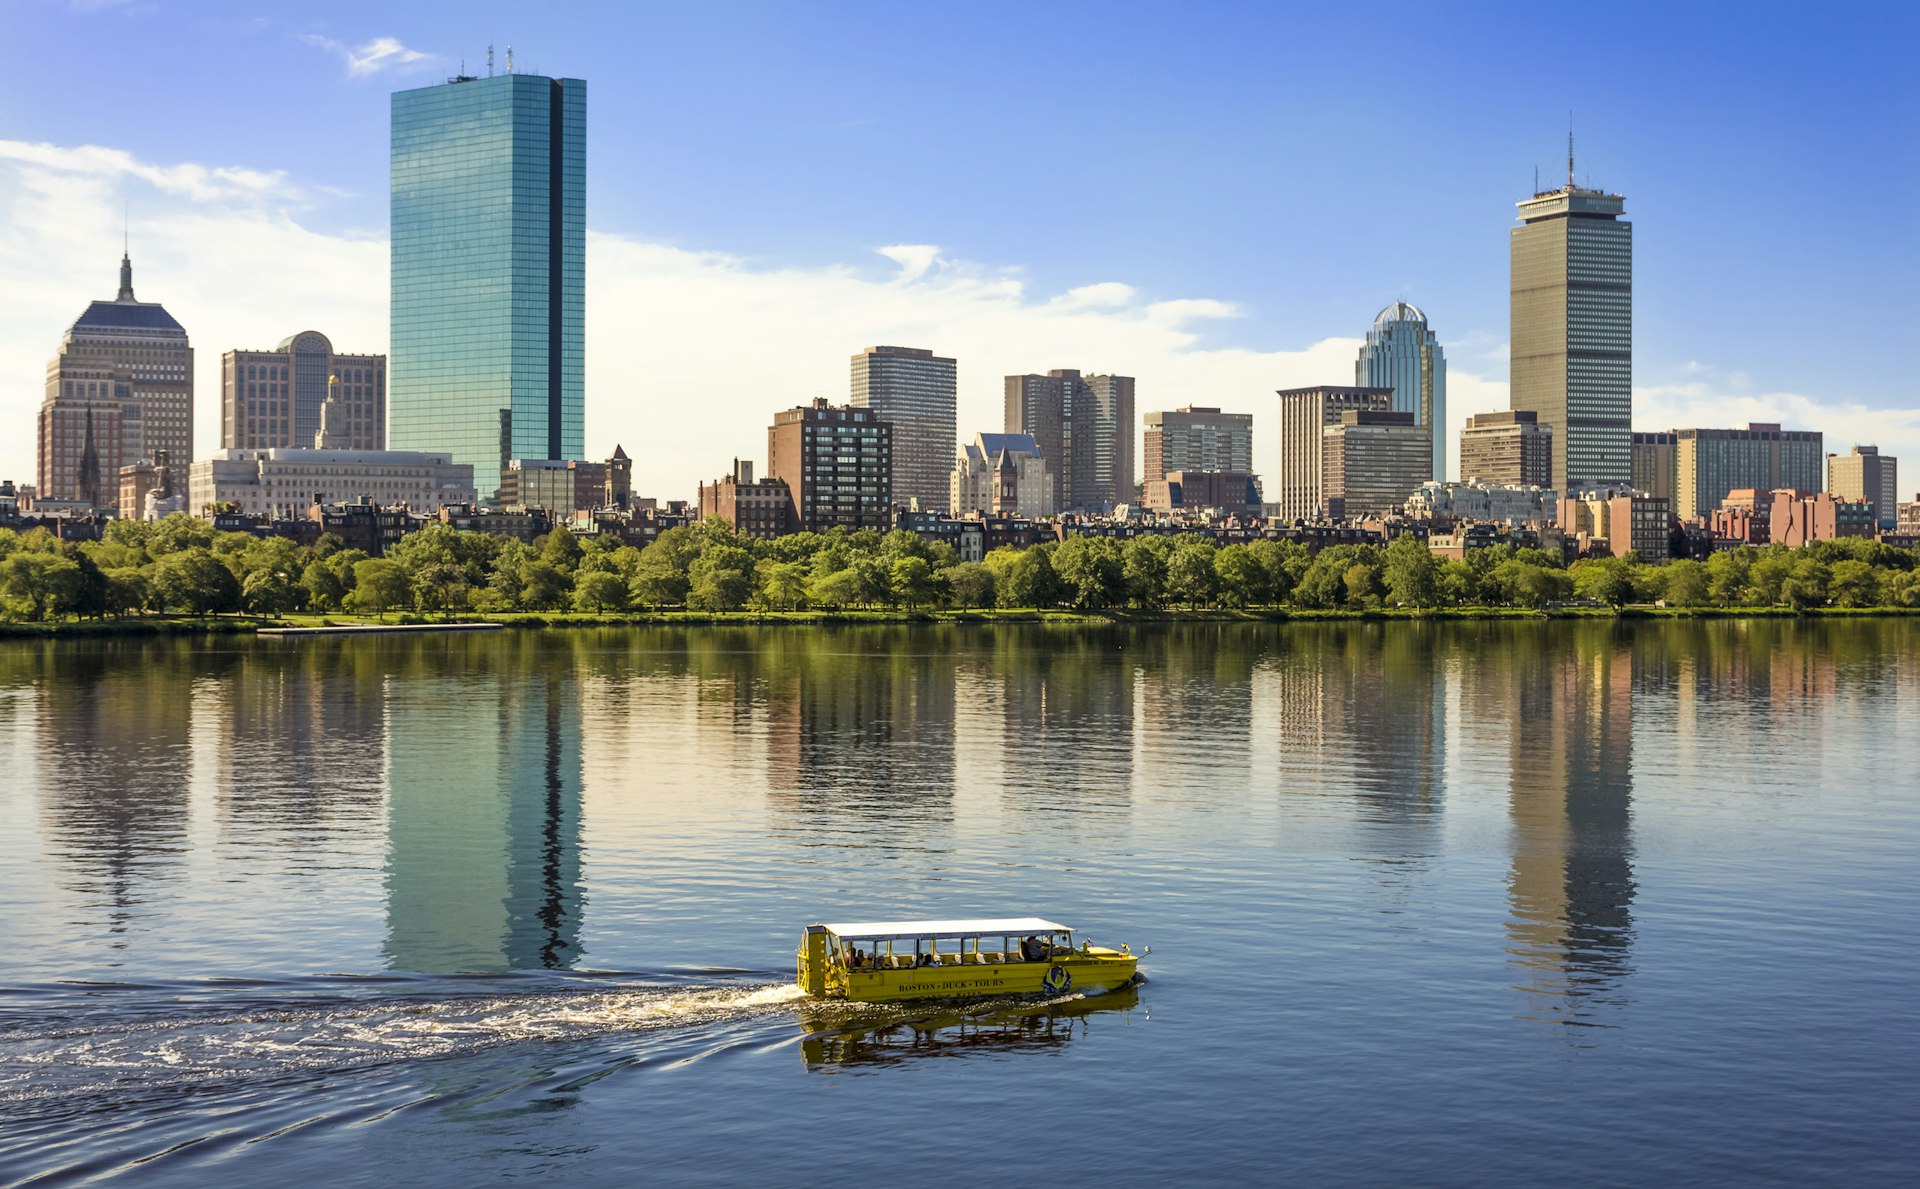 An amphibious boat sails along a river backed by some high-rise city buildings